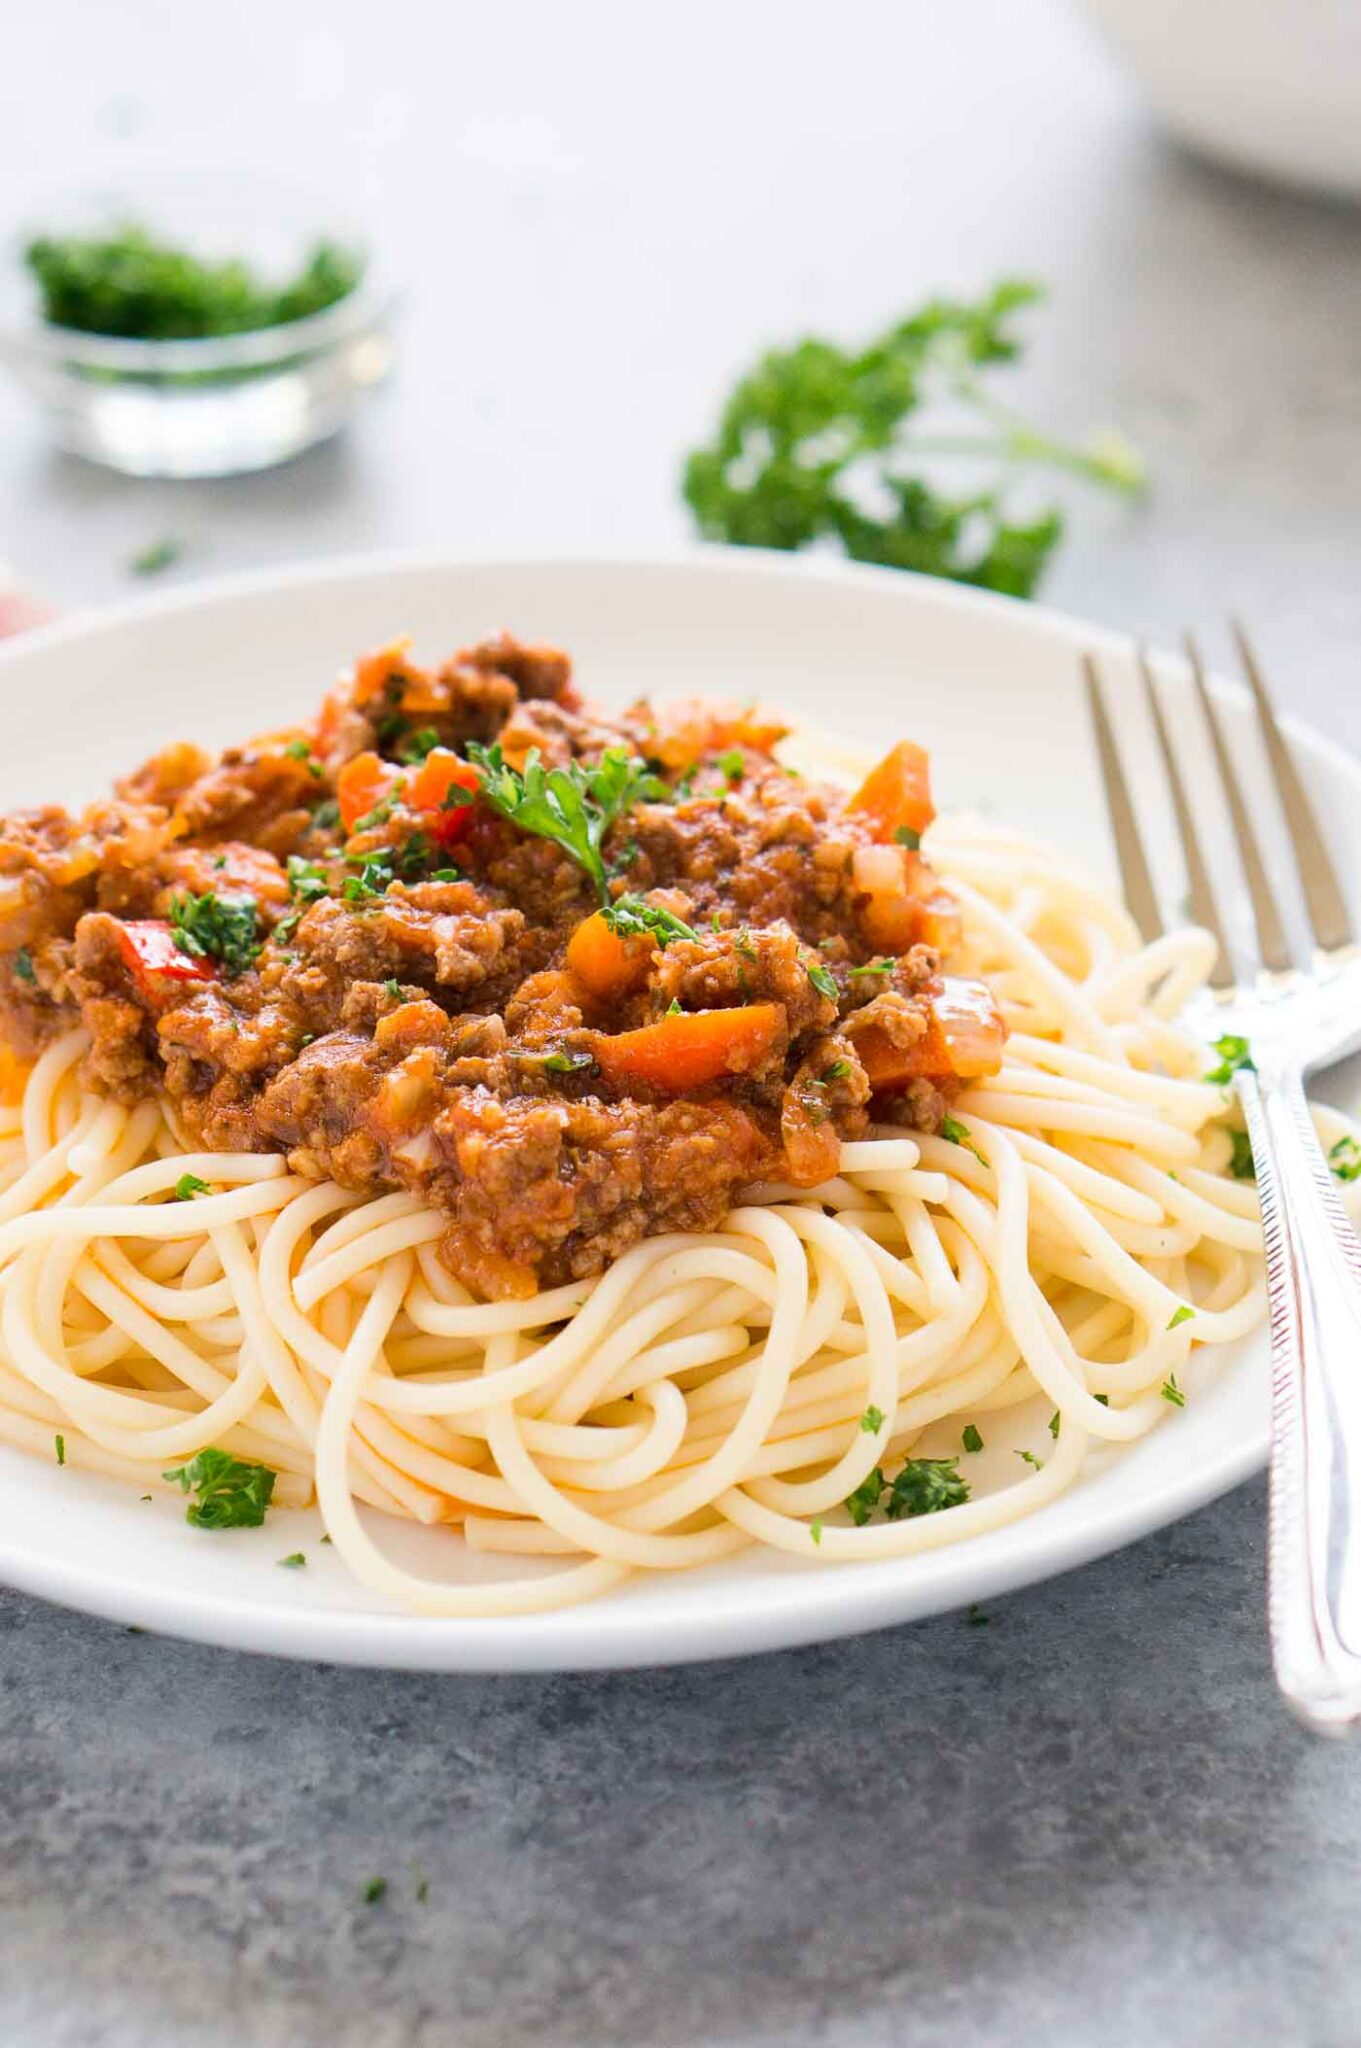 Bolognese sauce over cooked pasta